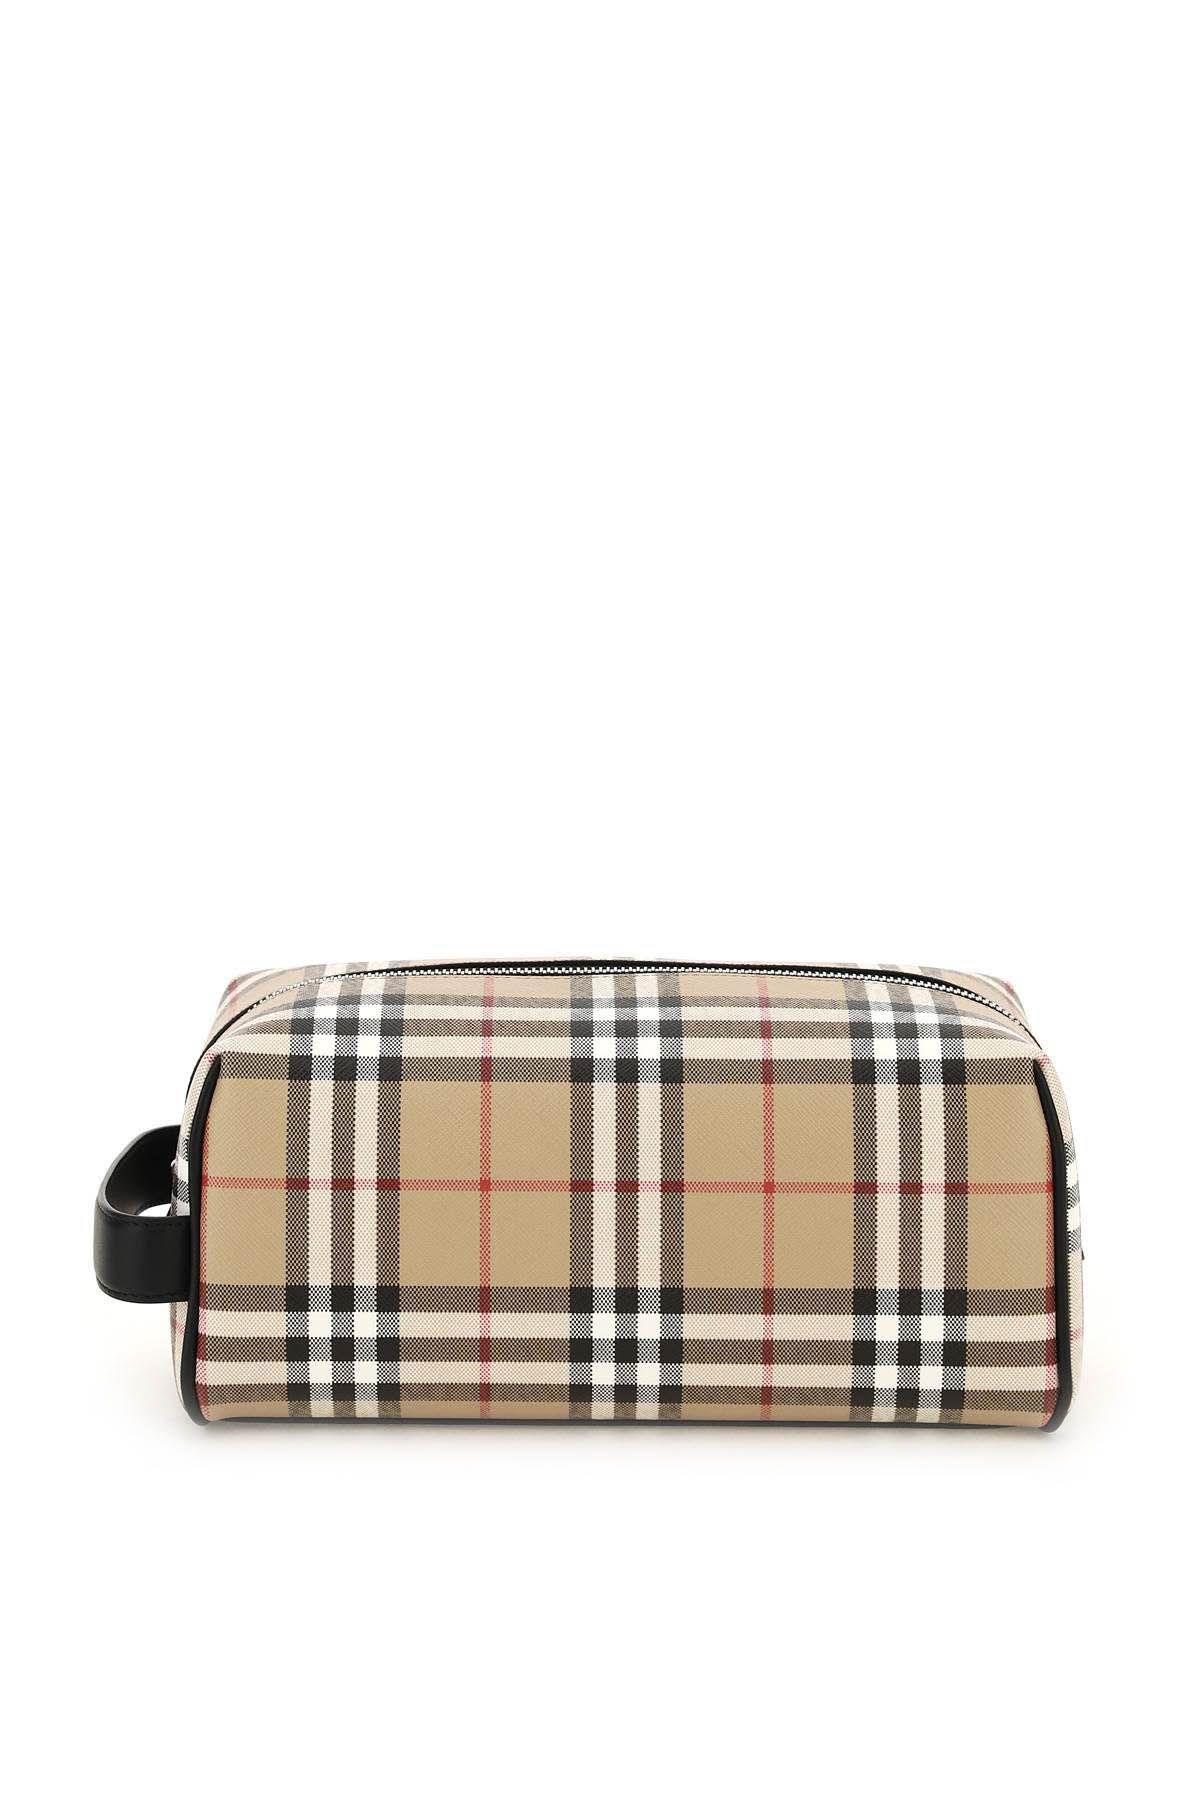 Burberry Vintage Check Coated Canvas Wash Bag